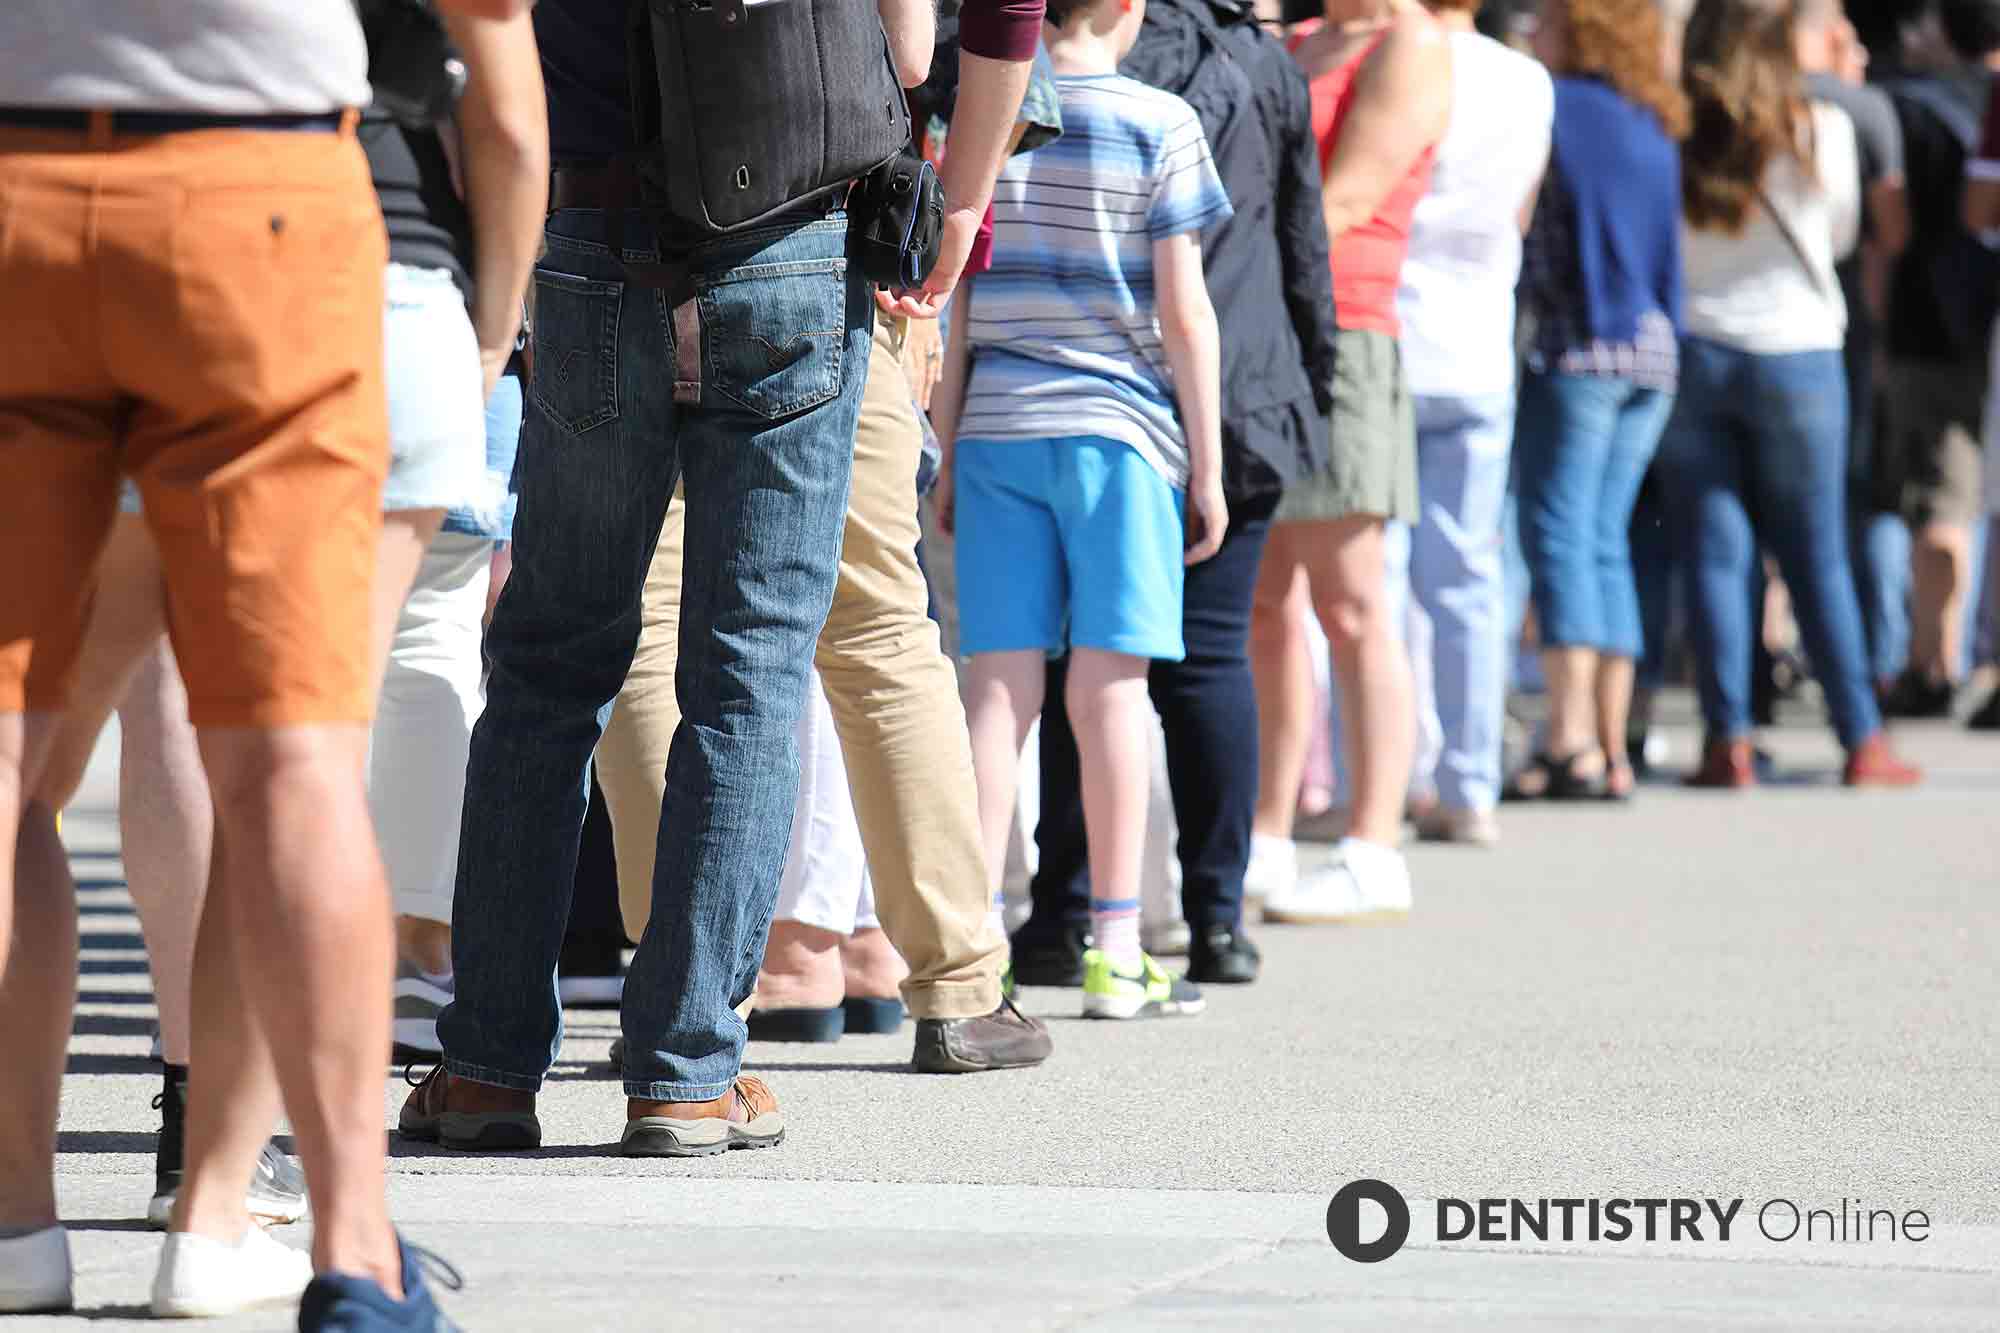 A Member of Parliament has warned of the 'frightening' access troubles plaguing dentistry as the pandemic continues